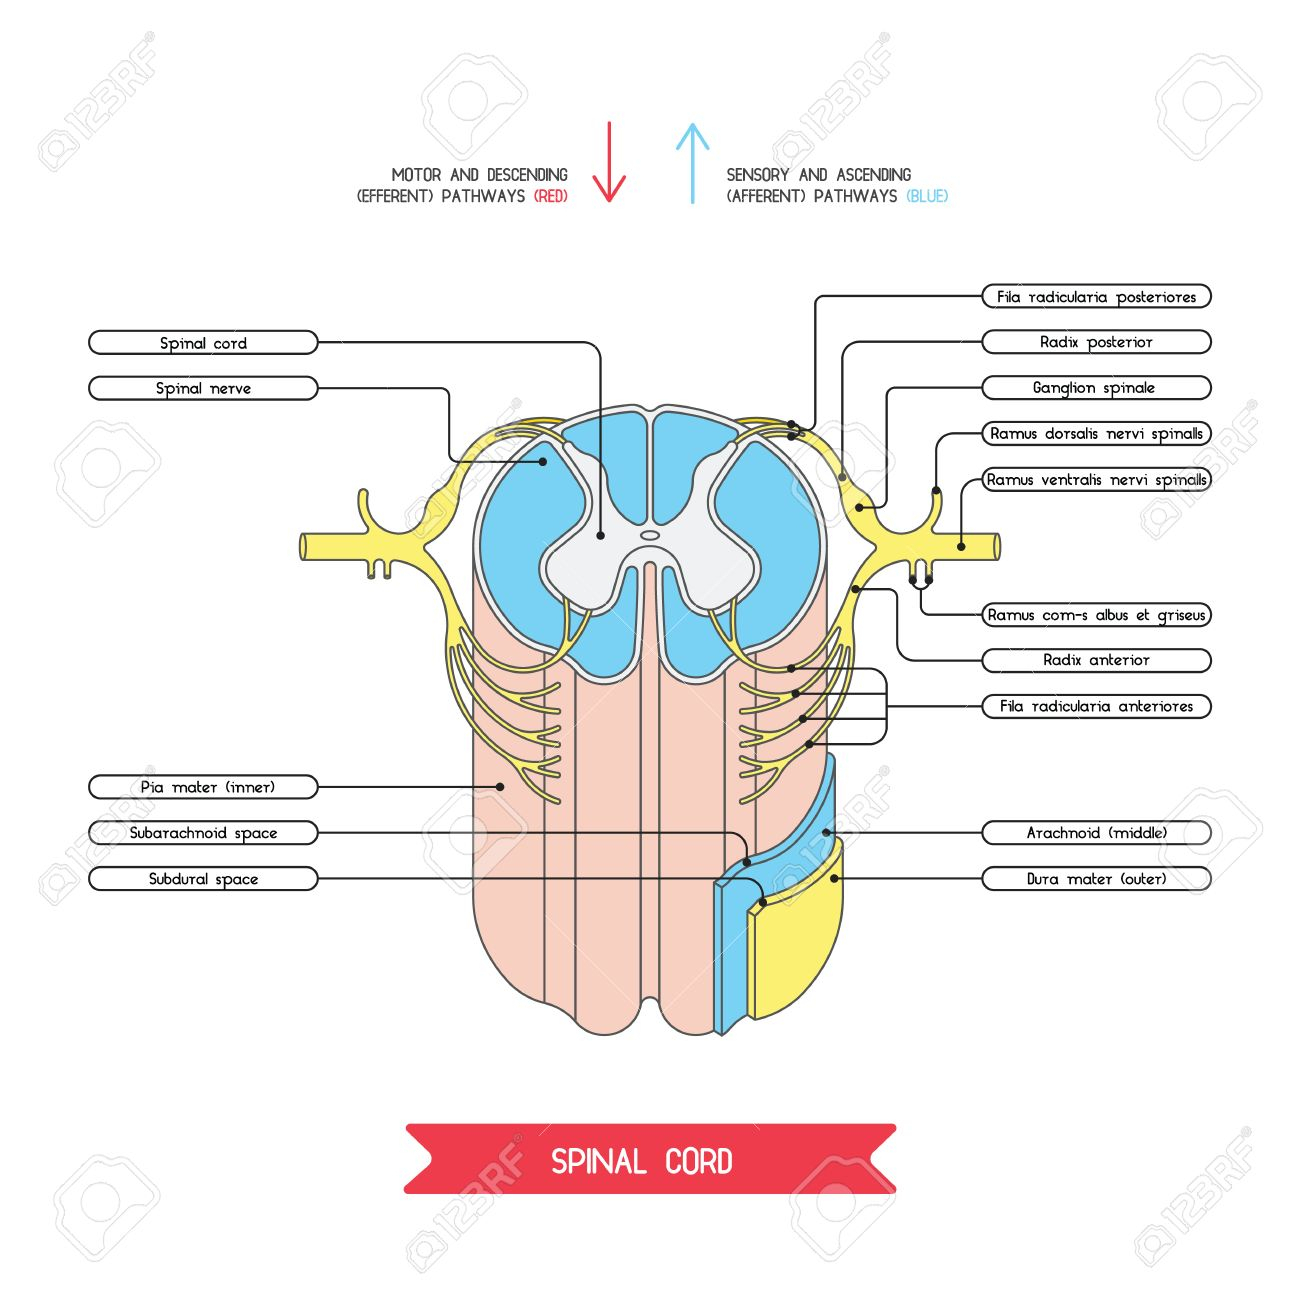 Spinal Cord Cross Section Diagram - Wiring Diagram